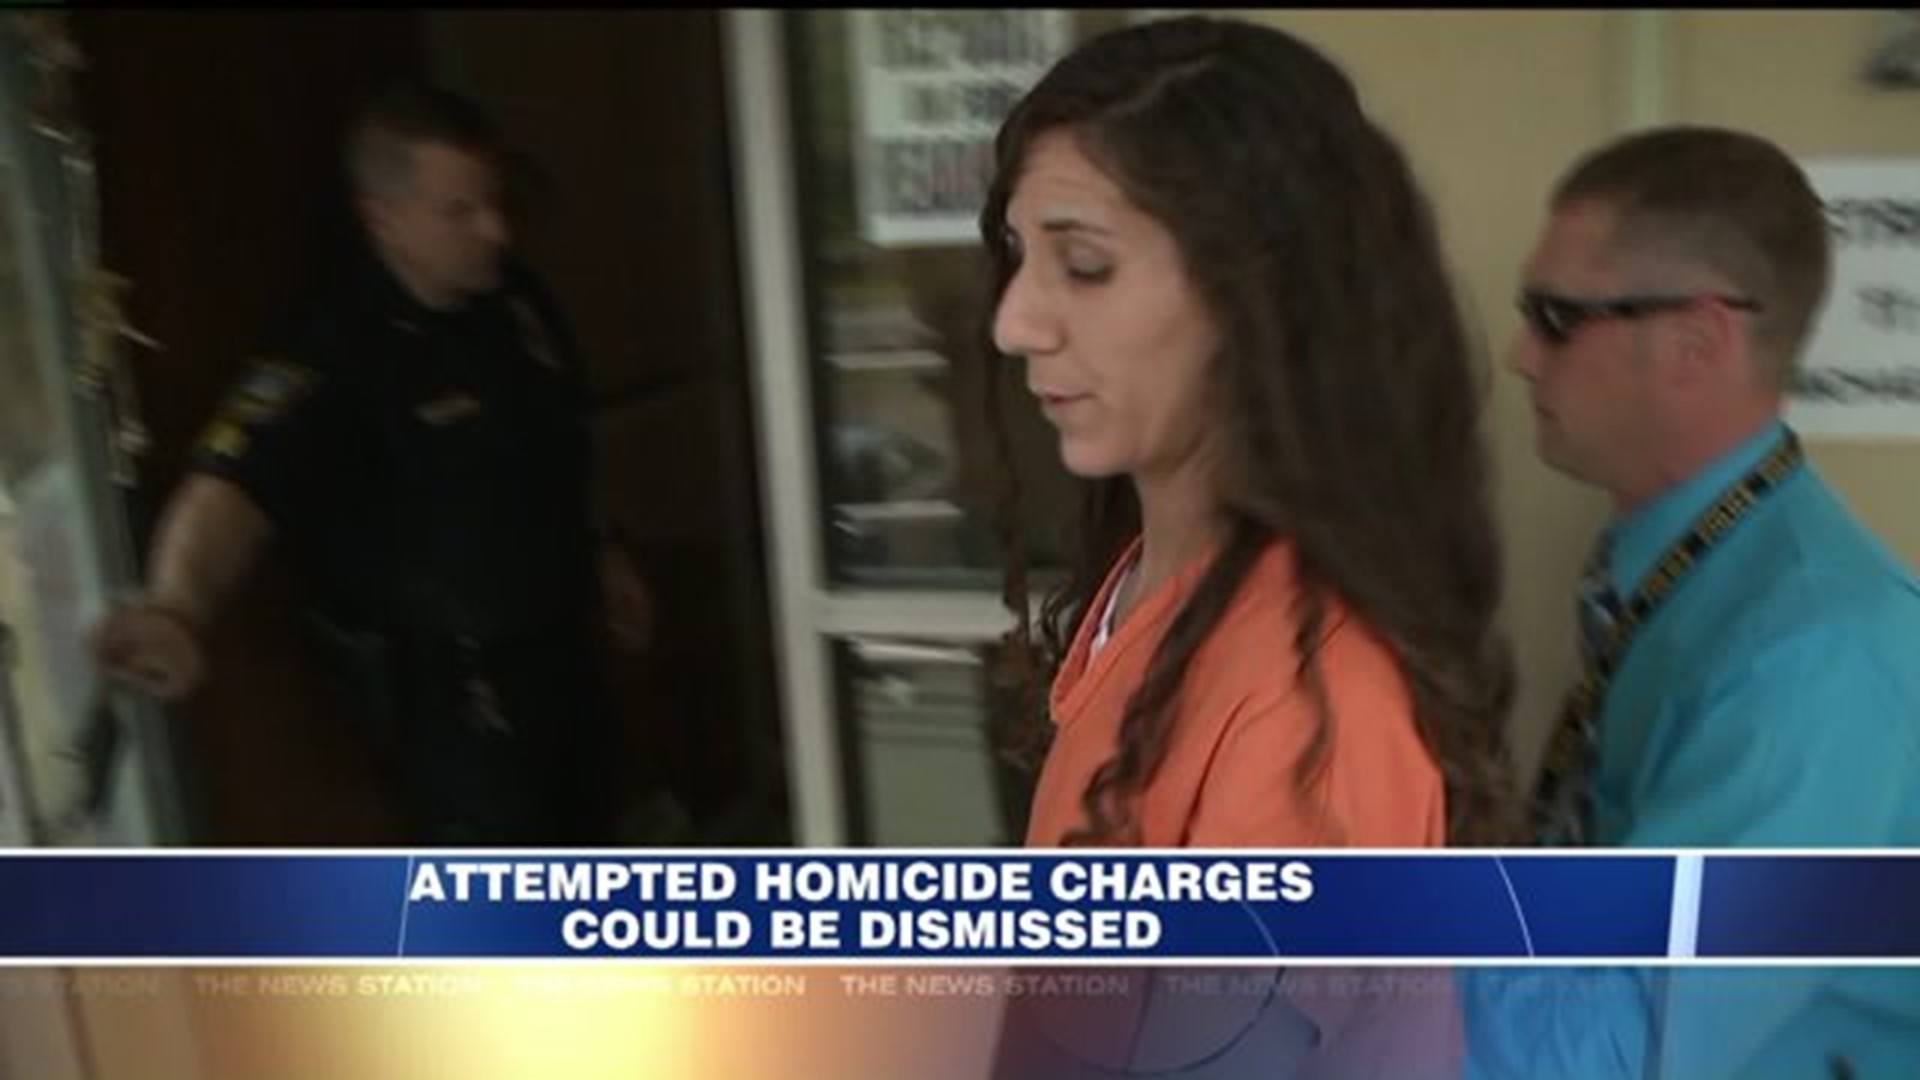 Mother Accused of Trying to Kill Her Children Could Have Charges Dismissed